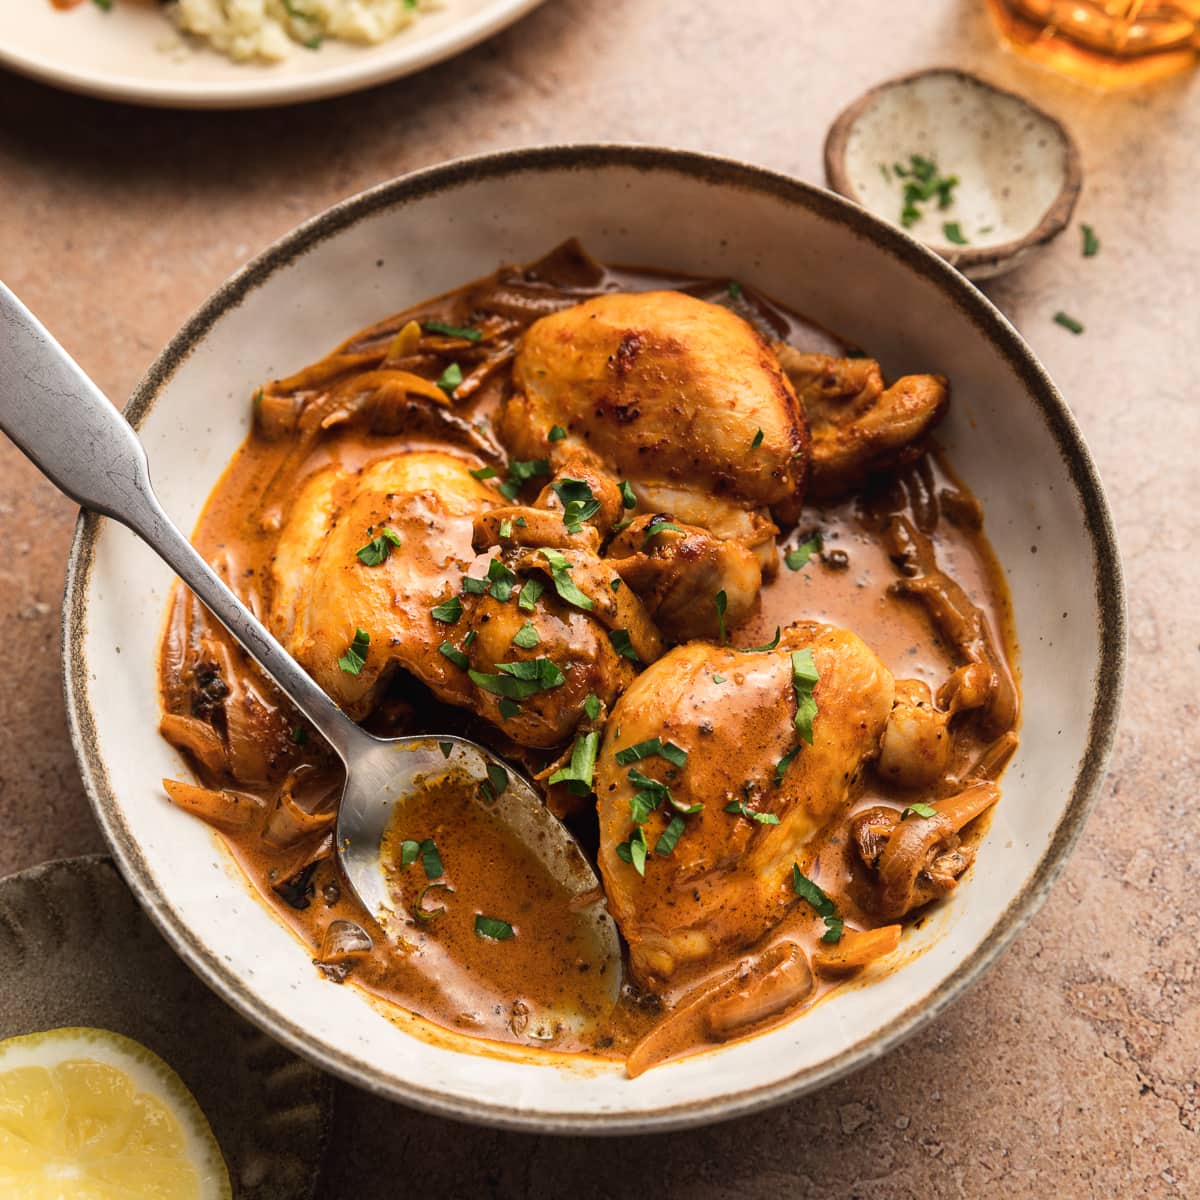 Creamy paprika chicken thighs in a bowl topped with parsley.